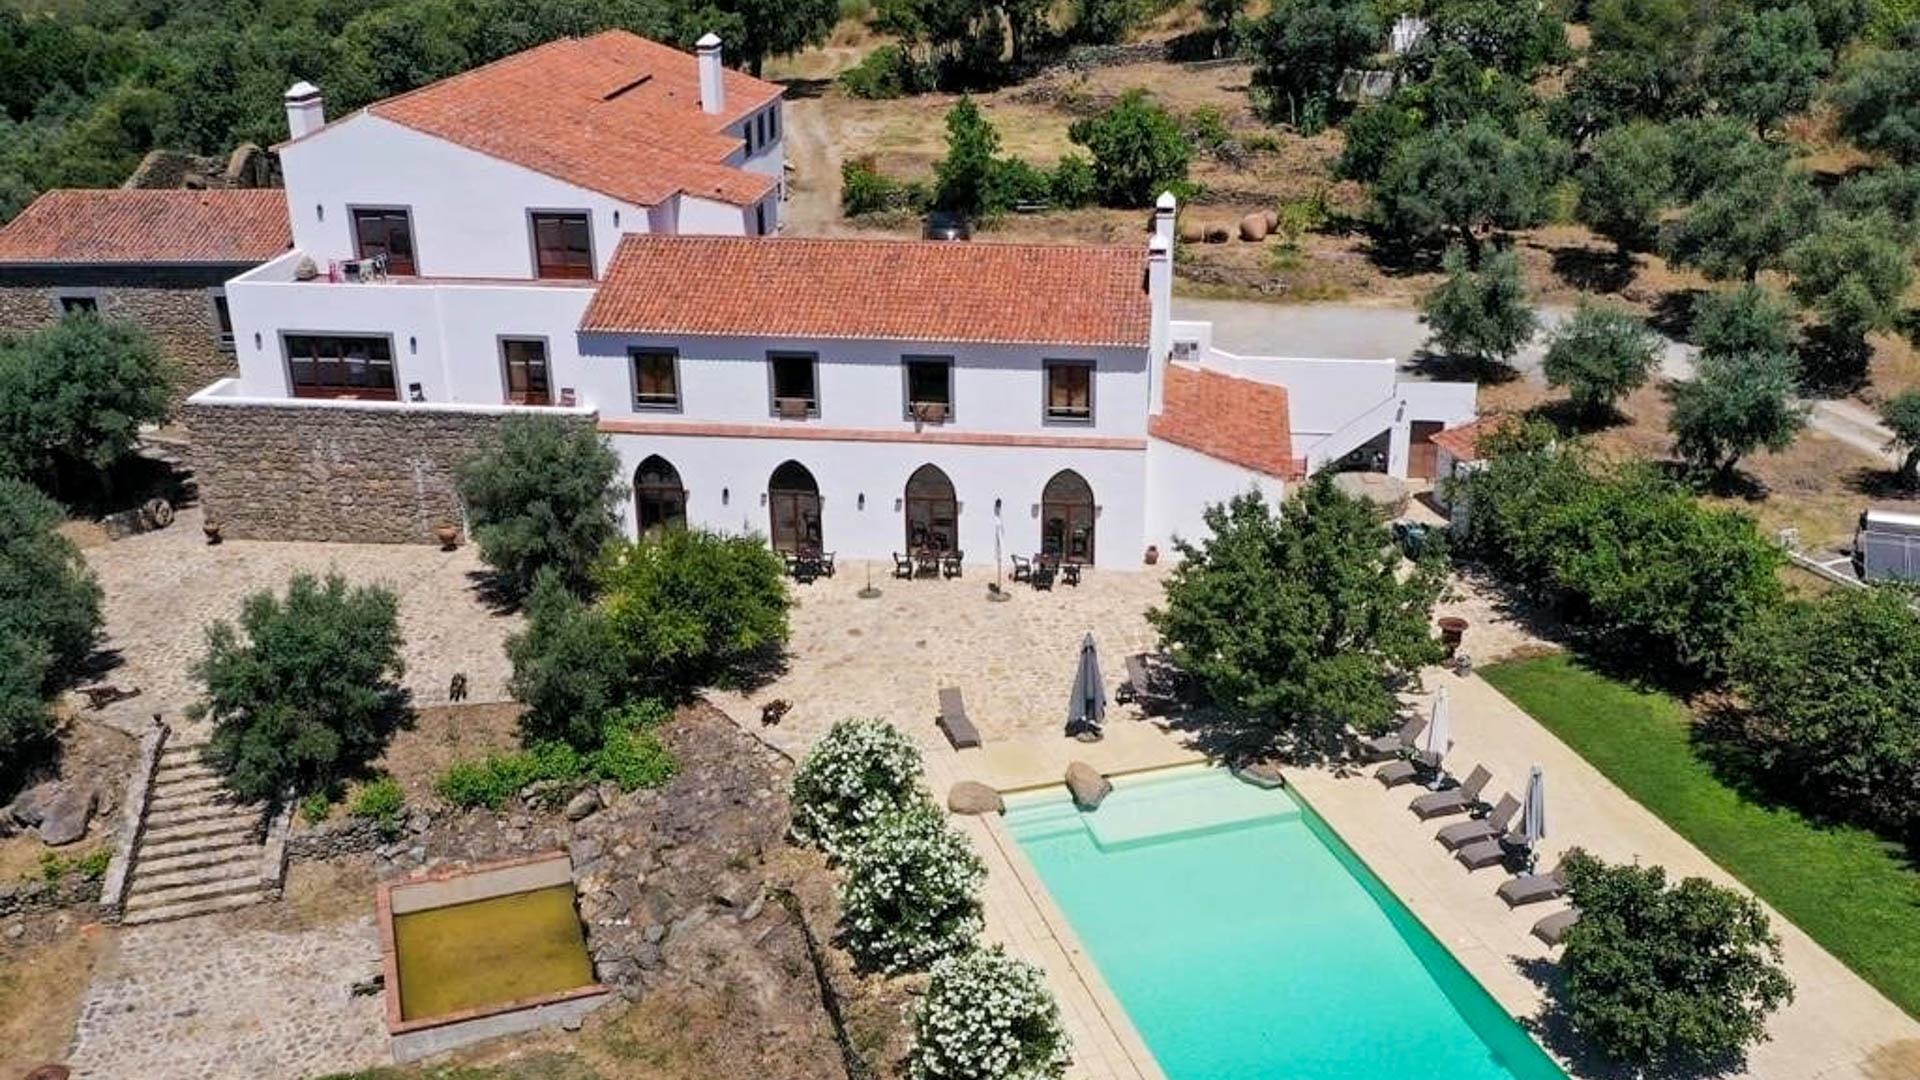 12th Century Tourist Unit with 11 bedrooms in Serra de São Mamede, Portalegre, Alto Alentejo | PDB1928 The convent, which dates back to the Middle Ages, belonged to "Buguinos" who adhered to voluntary poverty. After a period of neglect, it was rehabilitated in the 15th century by Bishop D. Jorge de Melo, whose weapons are visible in the ruins of the court gate.
At XXI belonging to only one owner who rehabilitated part of the convent and enlarged it with a new nascent wing transforming it into a tourist unit.